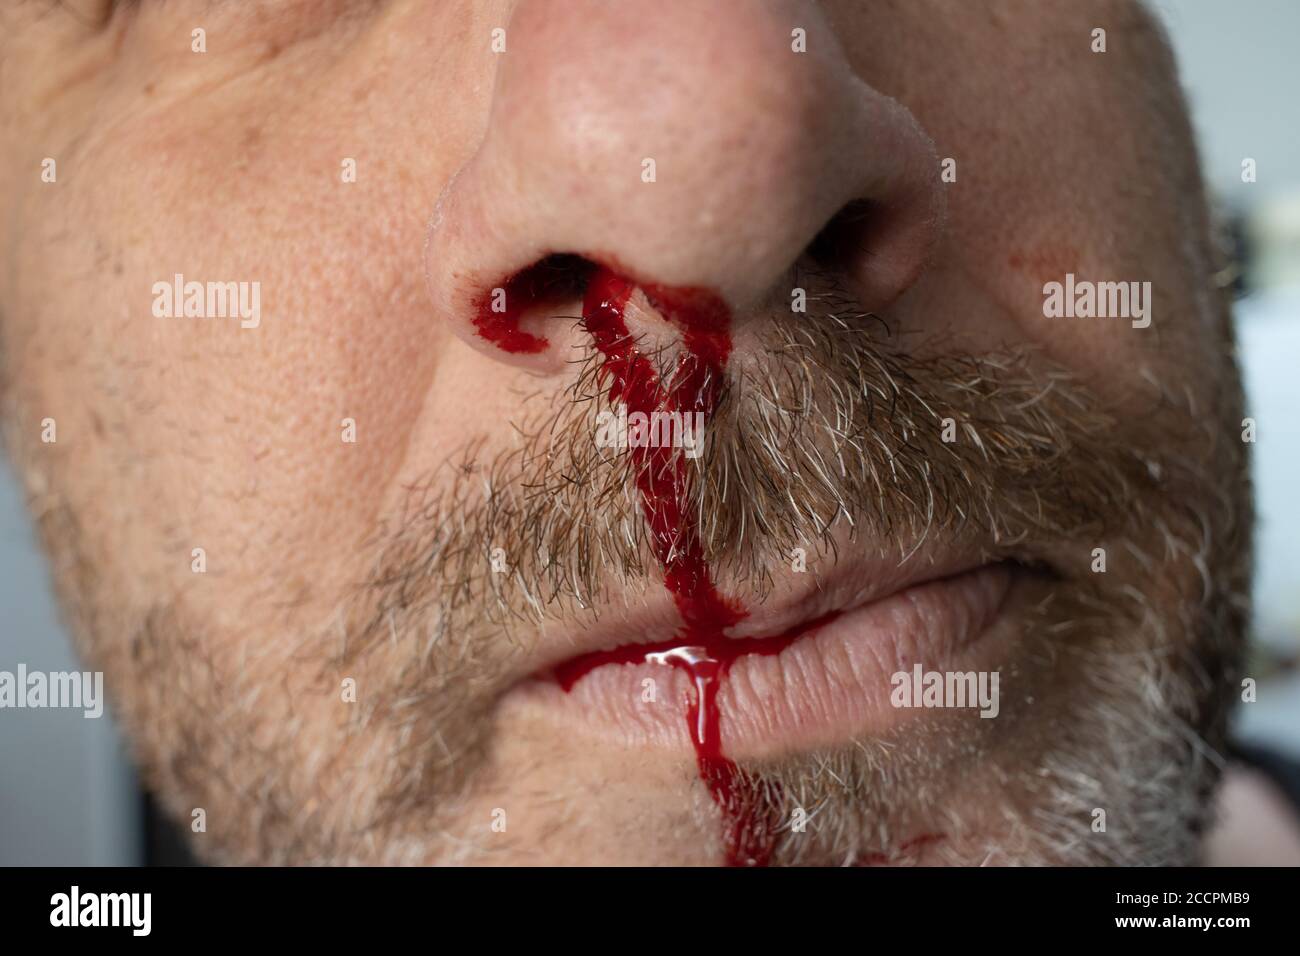 nosebleed , A man is bleeding from his nose Stock Photo